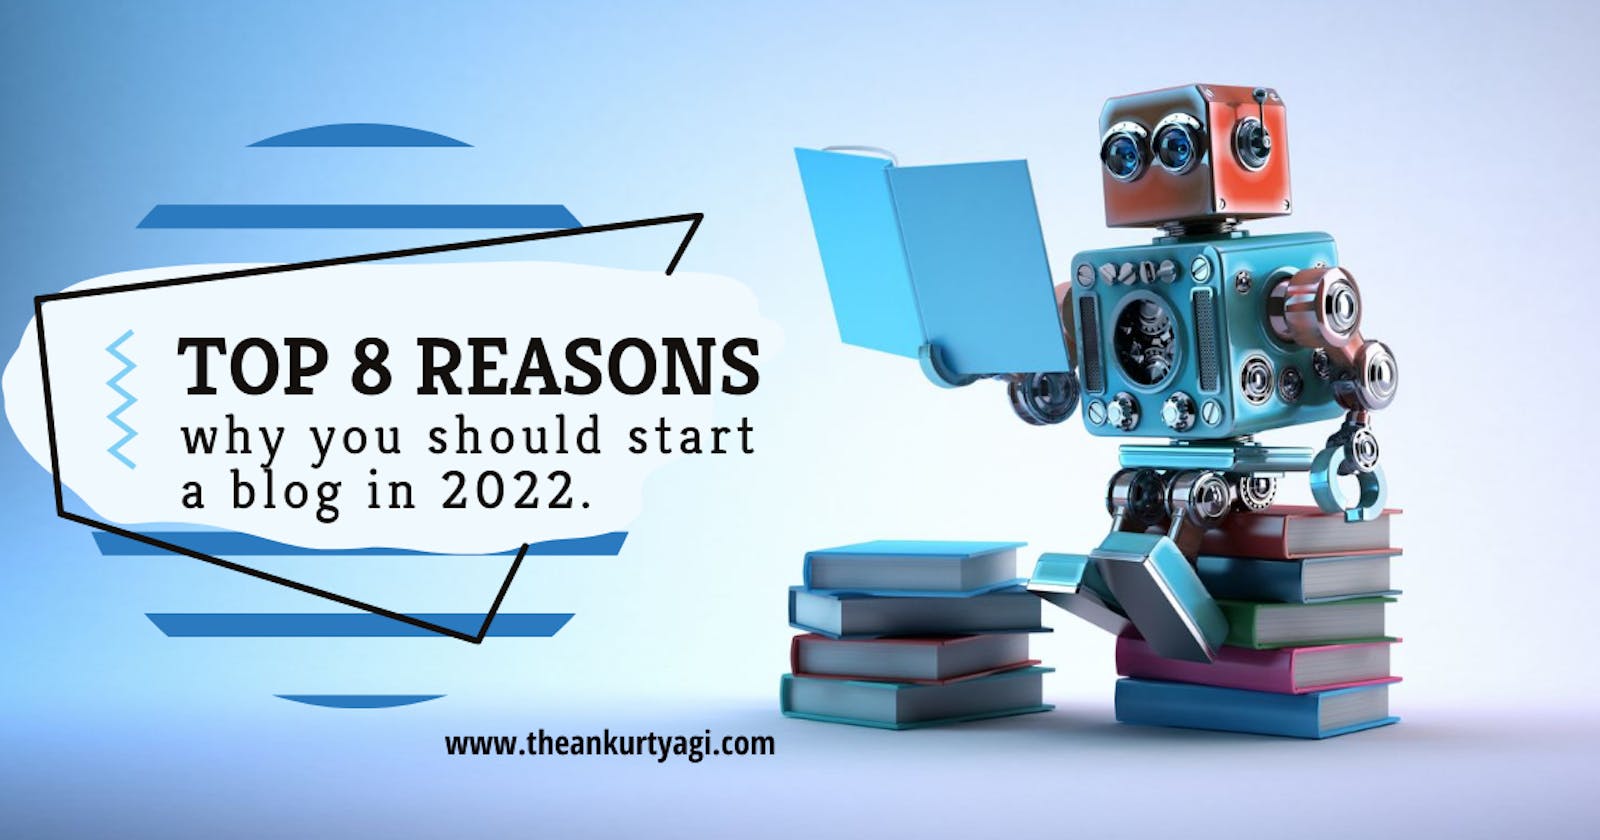 Top 8 reasons why you should start a blog in 2022